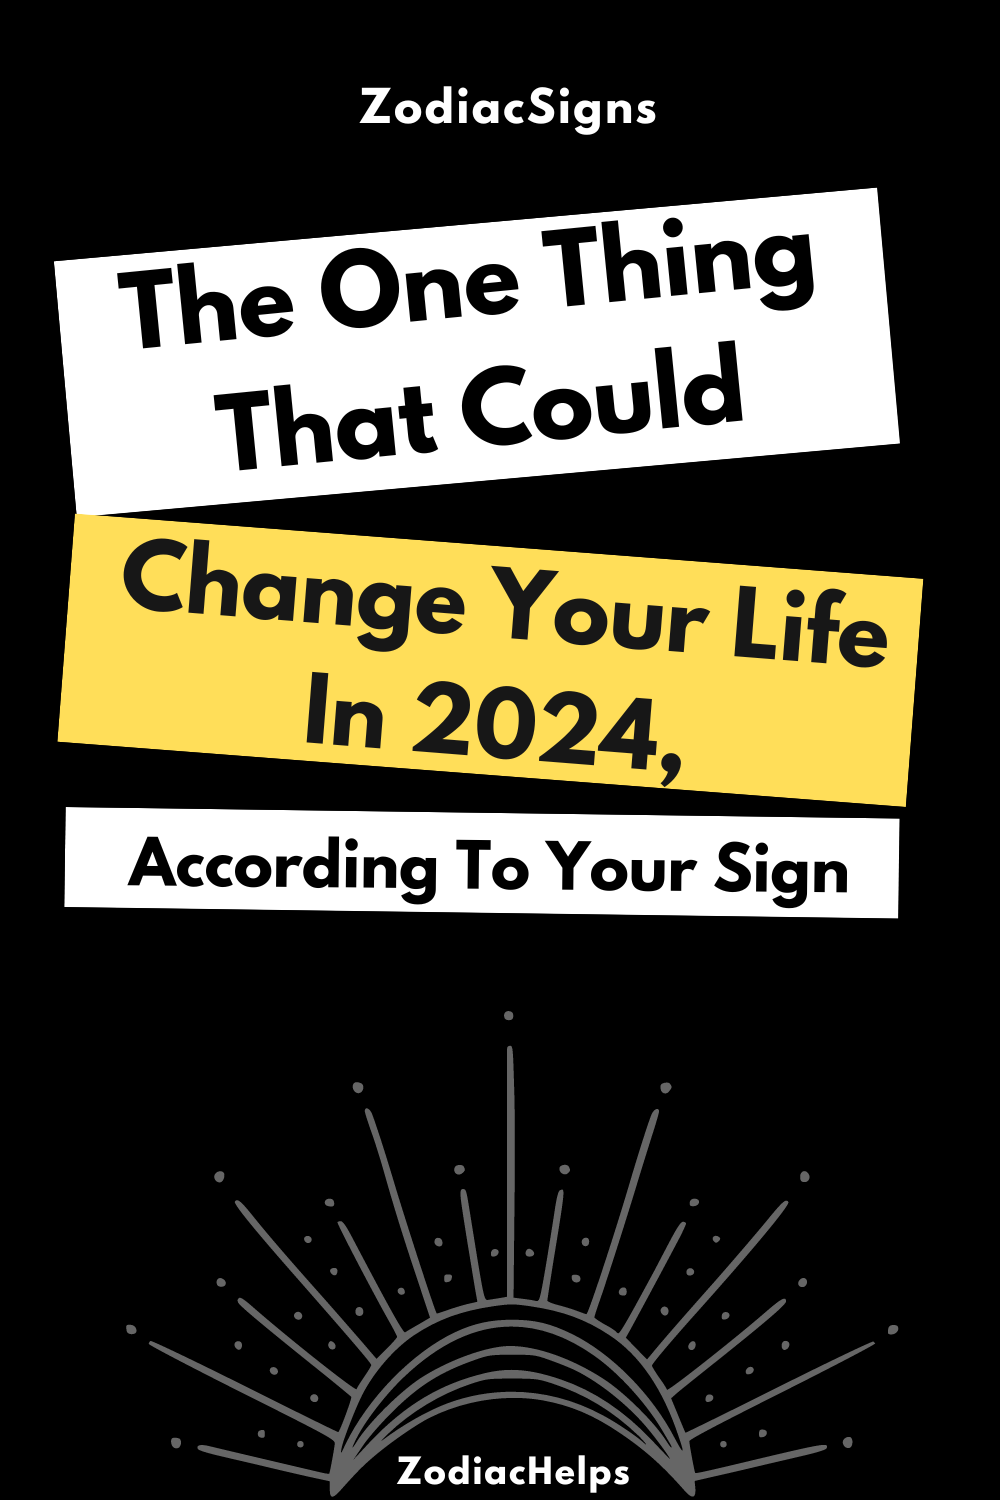 The One Thing That Could Change Your Life In 2024, According To Your Sign